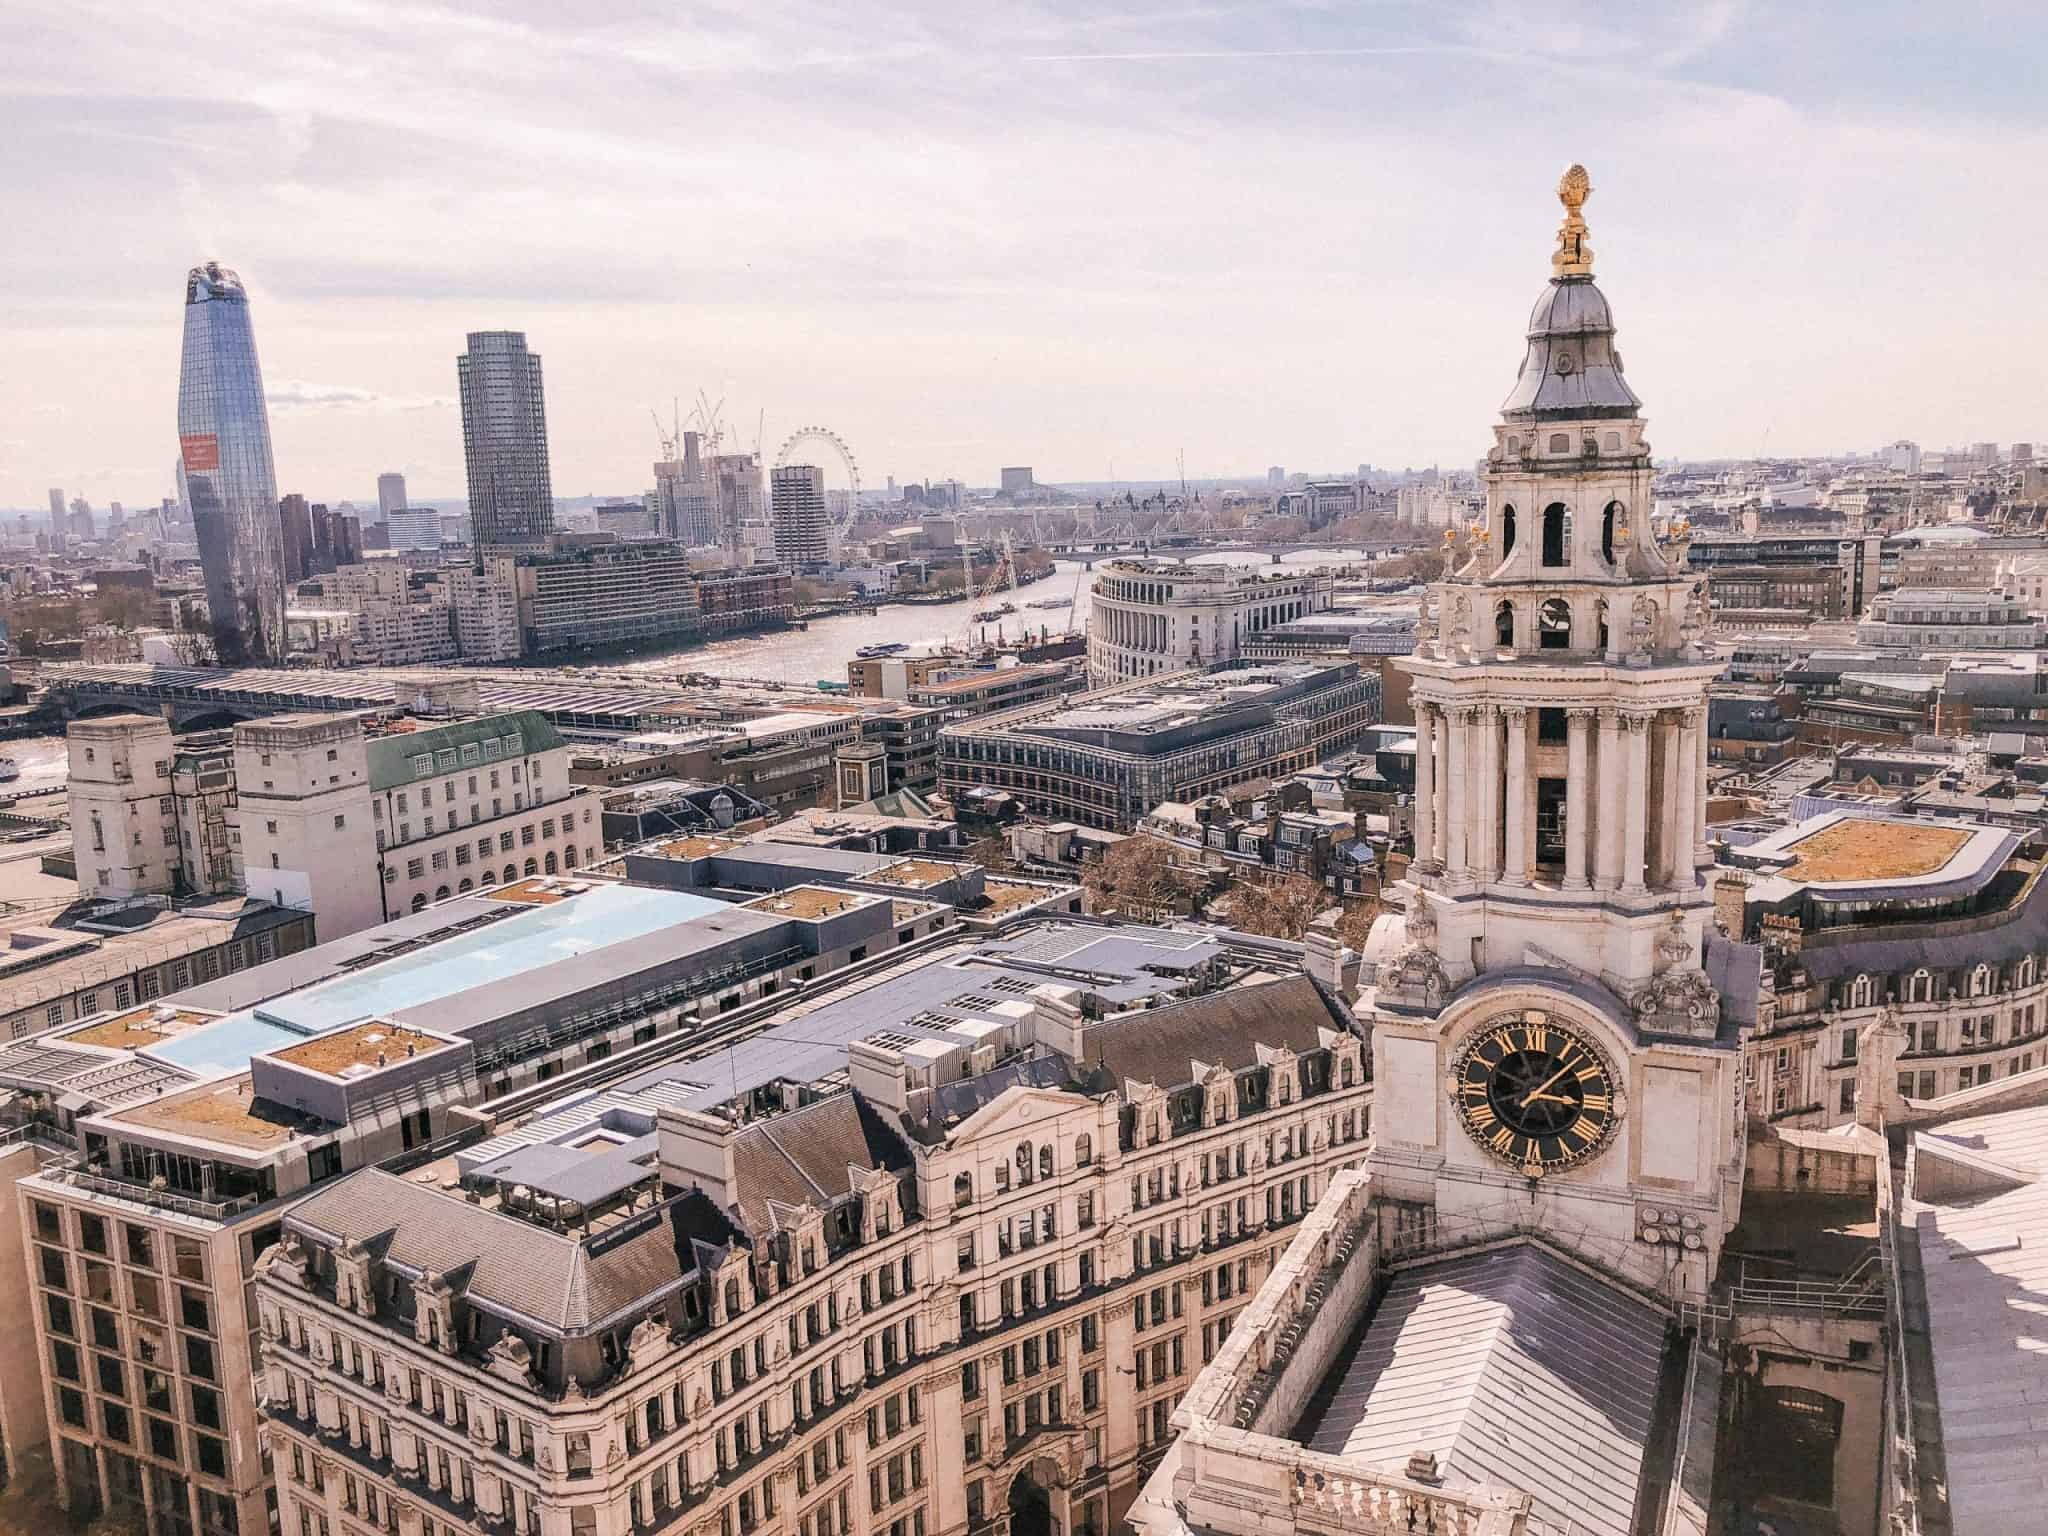 View from St. Paul's Cathedral observation deck